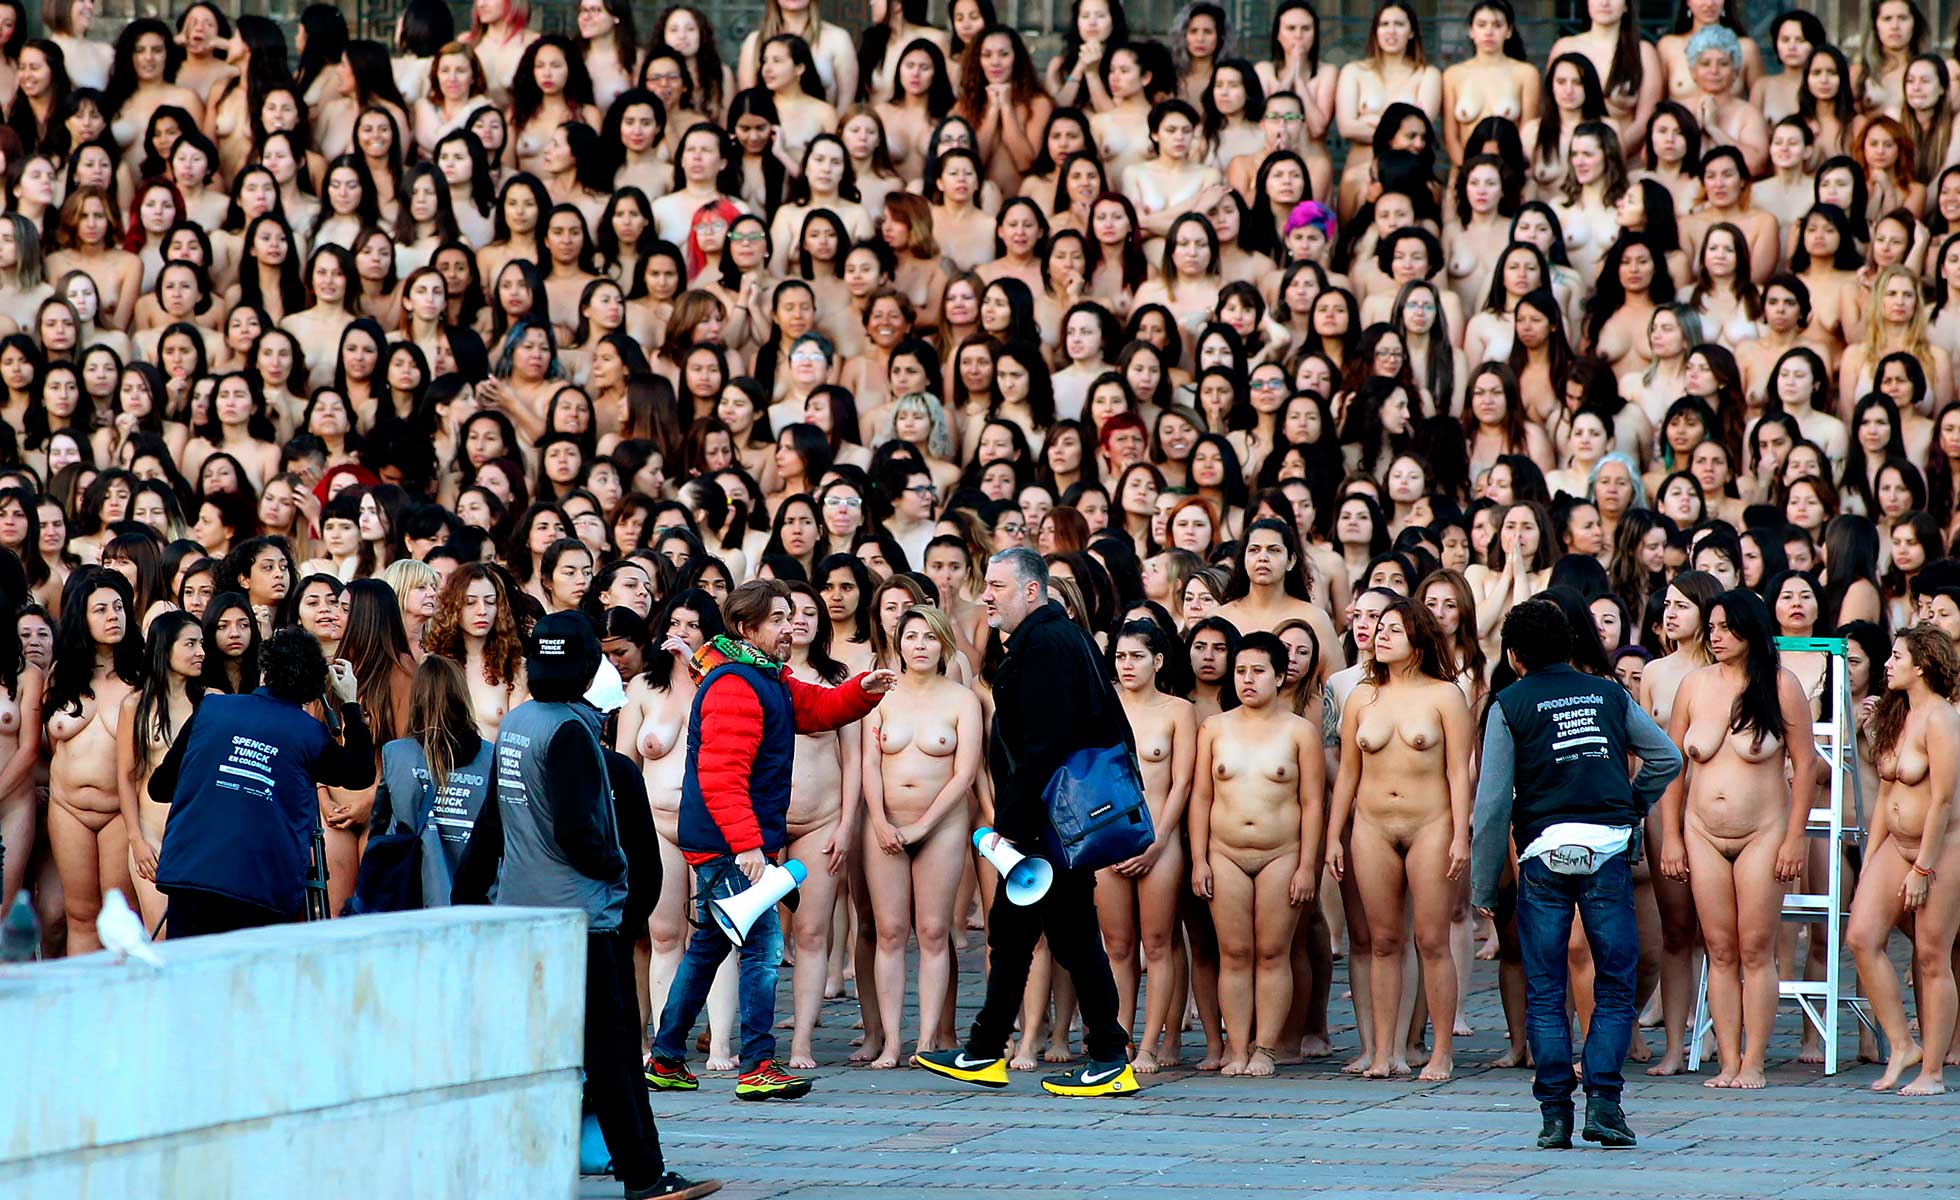 Naked groups of people.